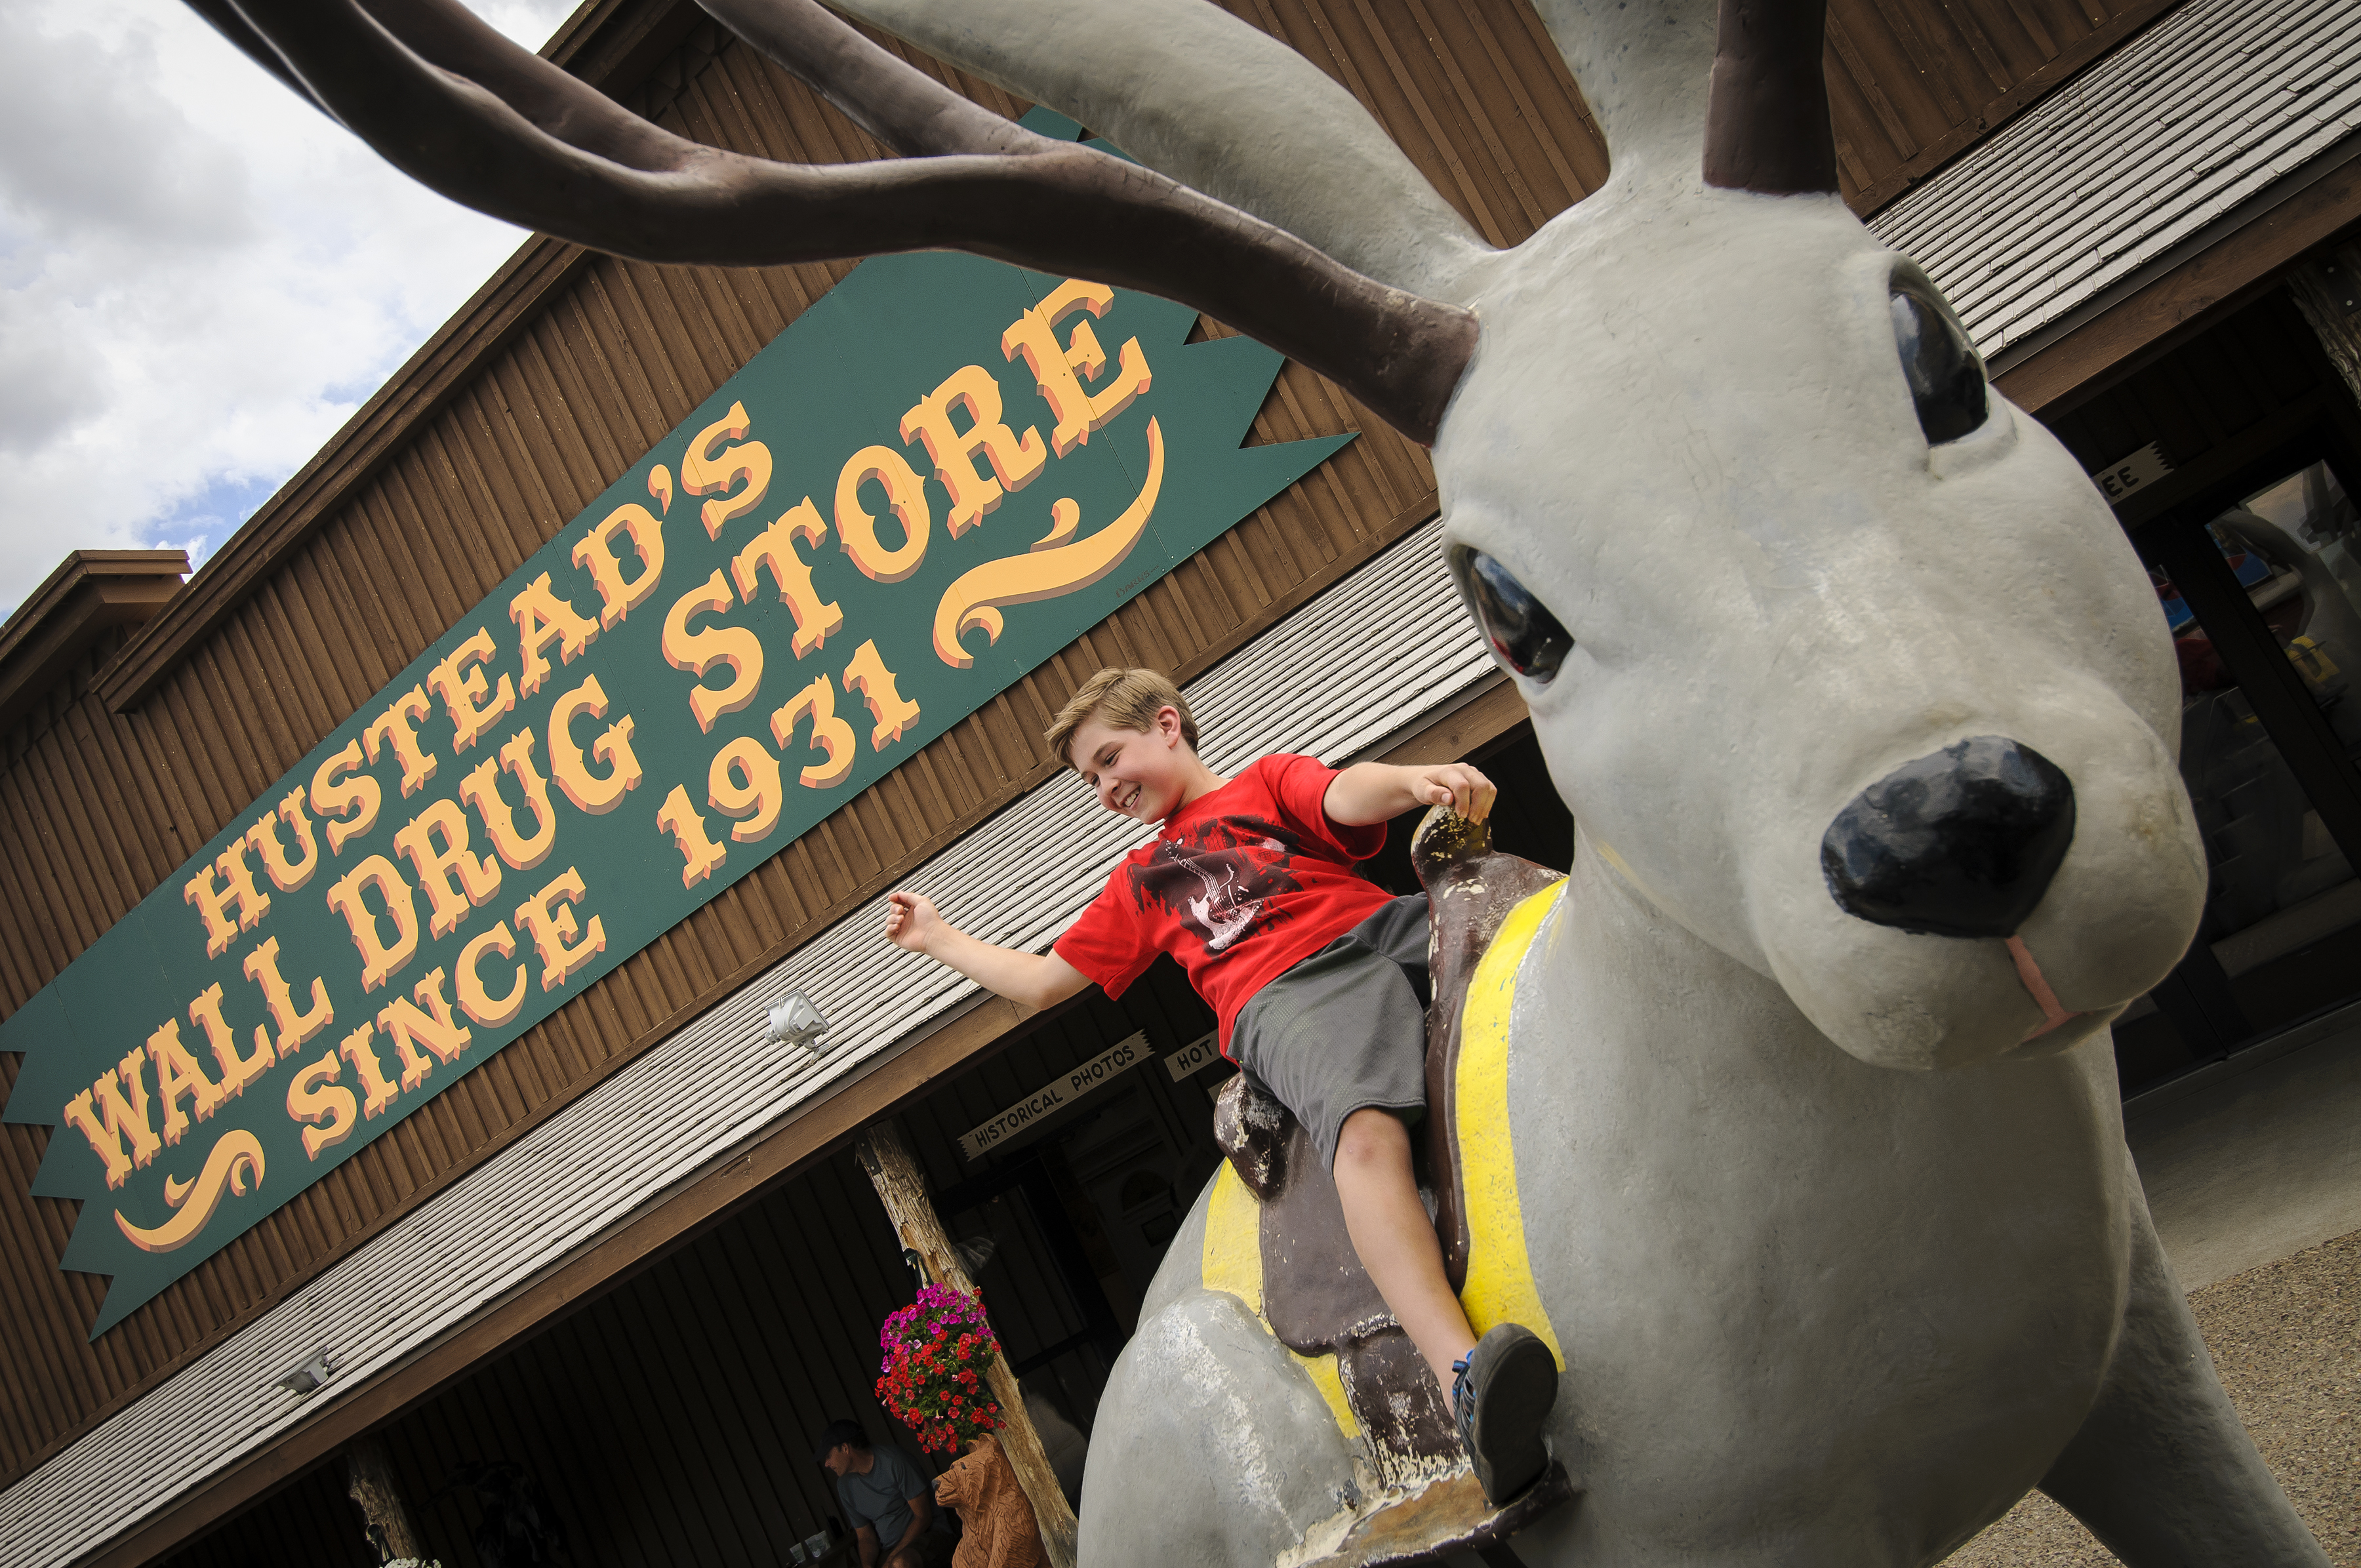 Wall Drug Store